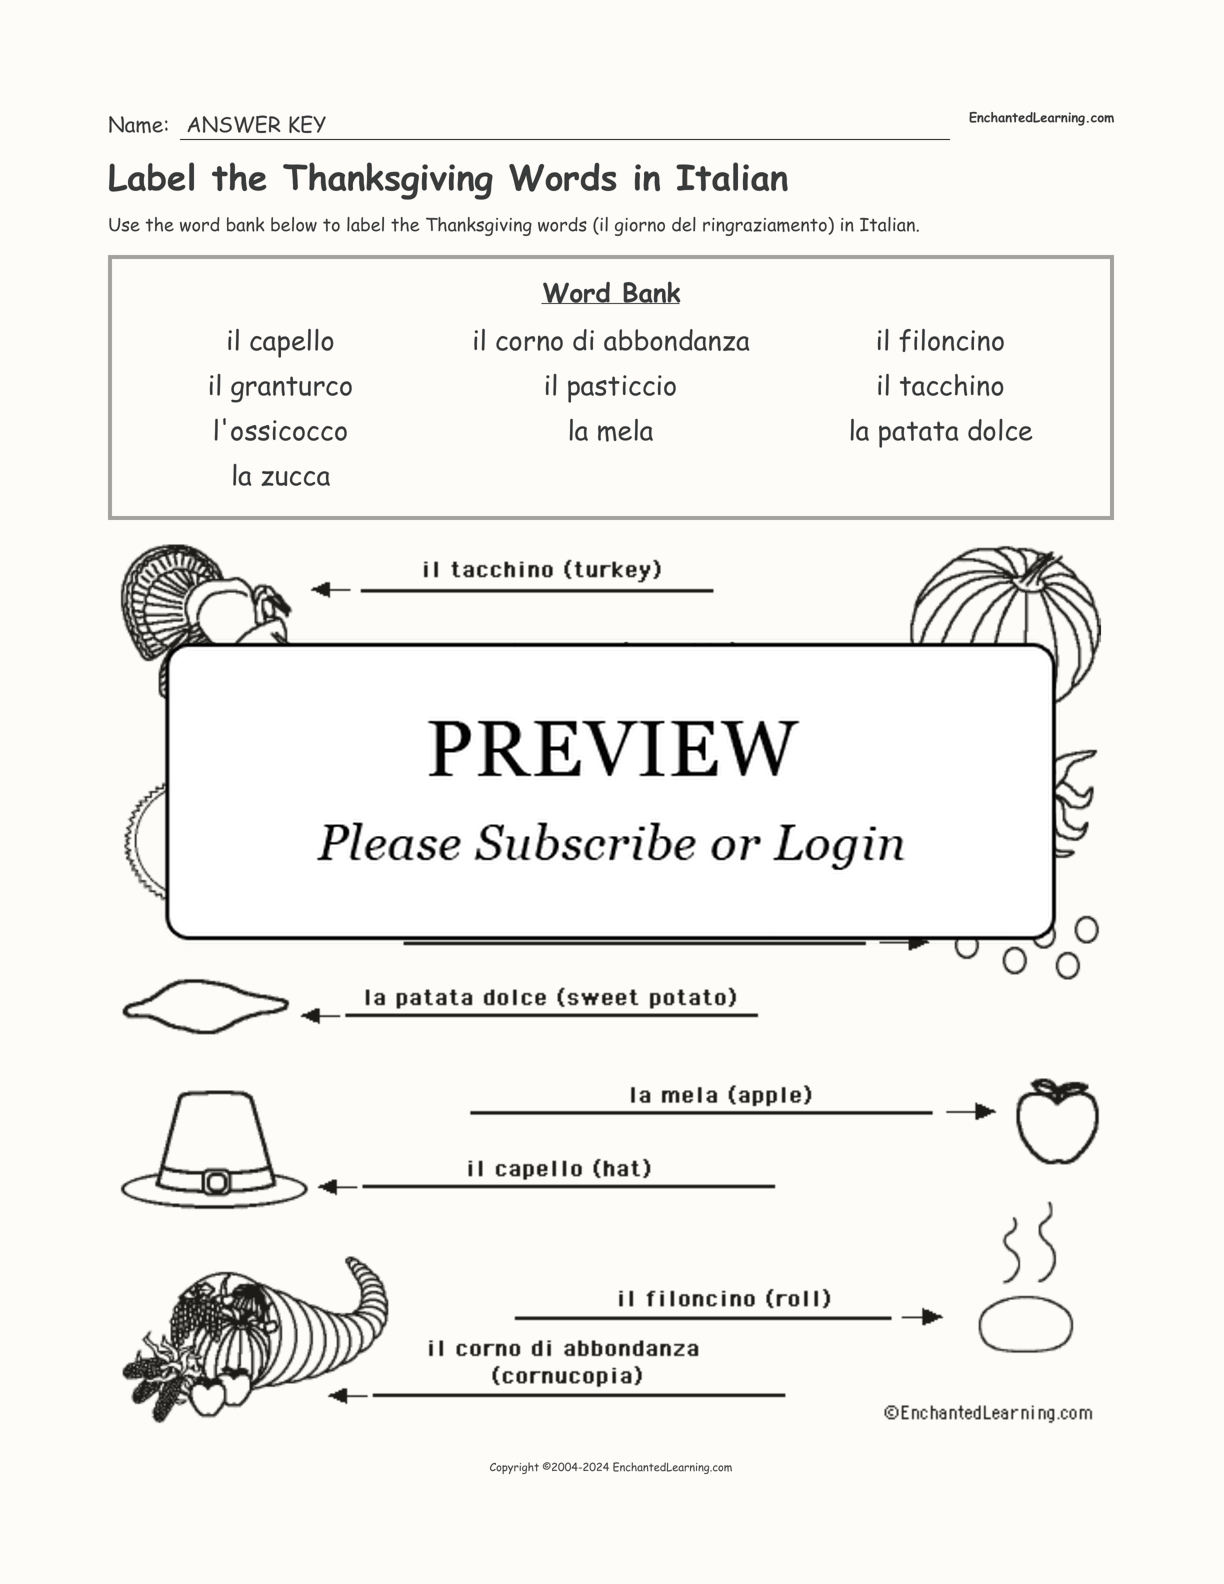 Label the Thanksgiving Words in Italian interactive worksheet page 2